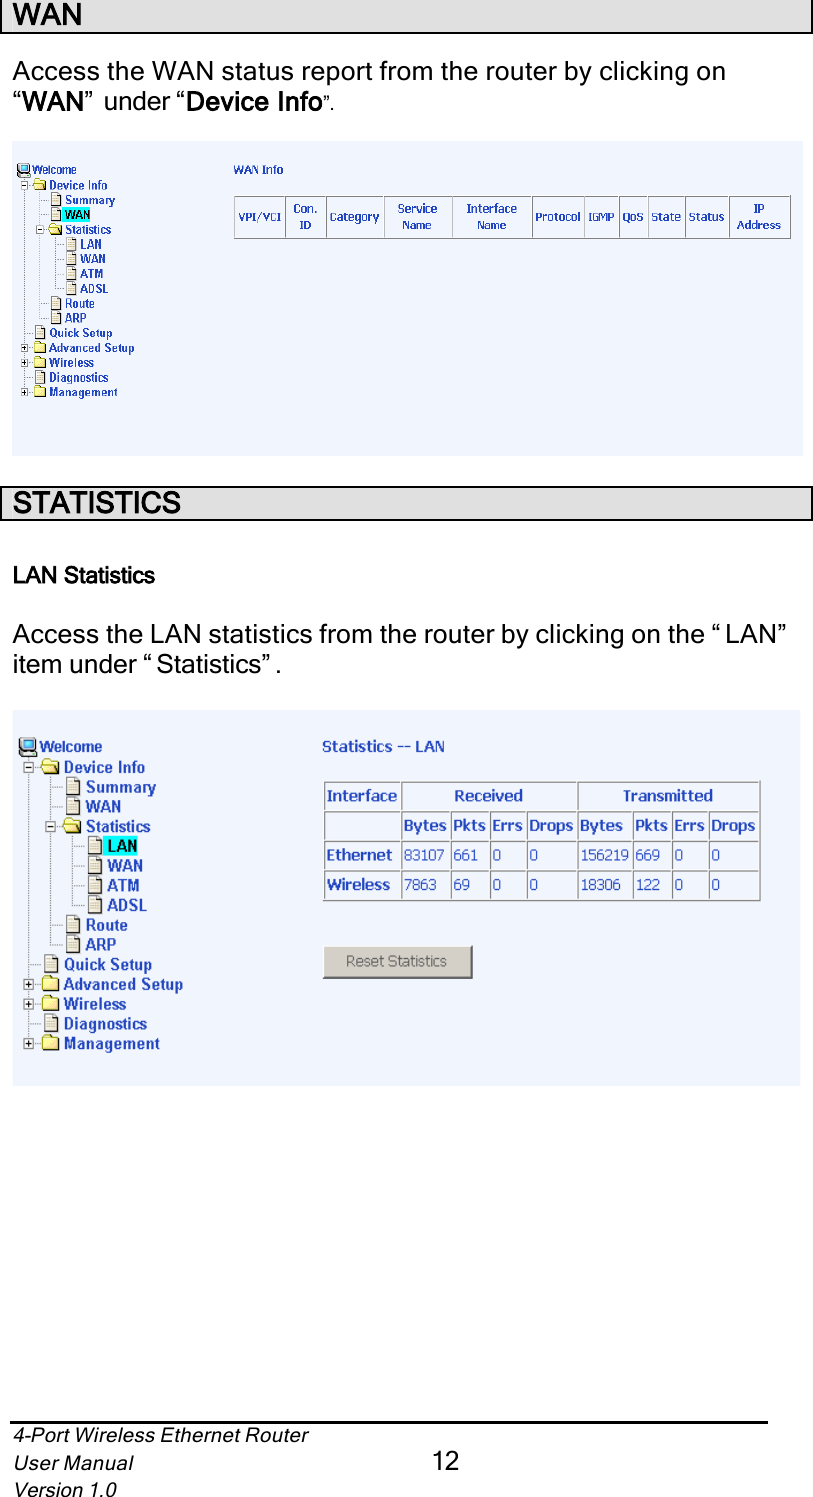 4-Port Wireless Ethernet RouterUser Manual12Version 1.0WANAccess the WAN status report from the router by clicking on “WANN”  under “Device Info”.STATISTICSLAN StatisticsAccess the LAN statistics from the router by clicking on the “ LAN”  item under “ Statistics” . 